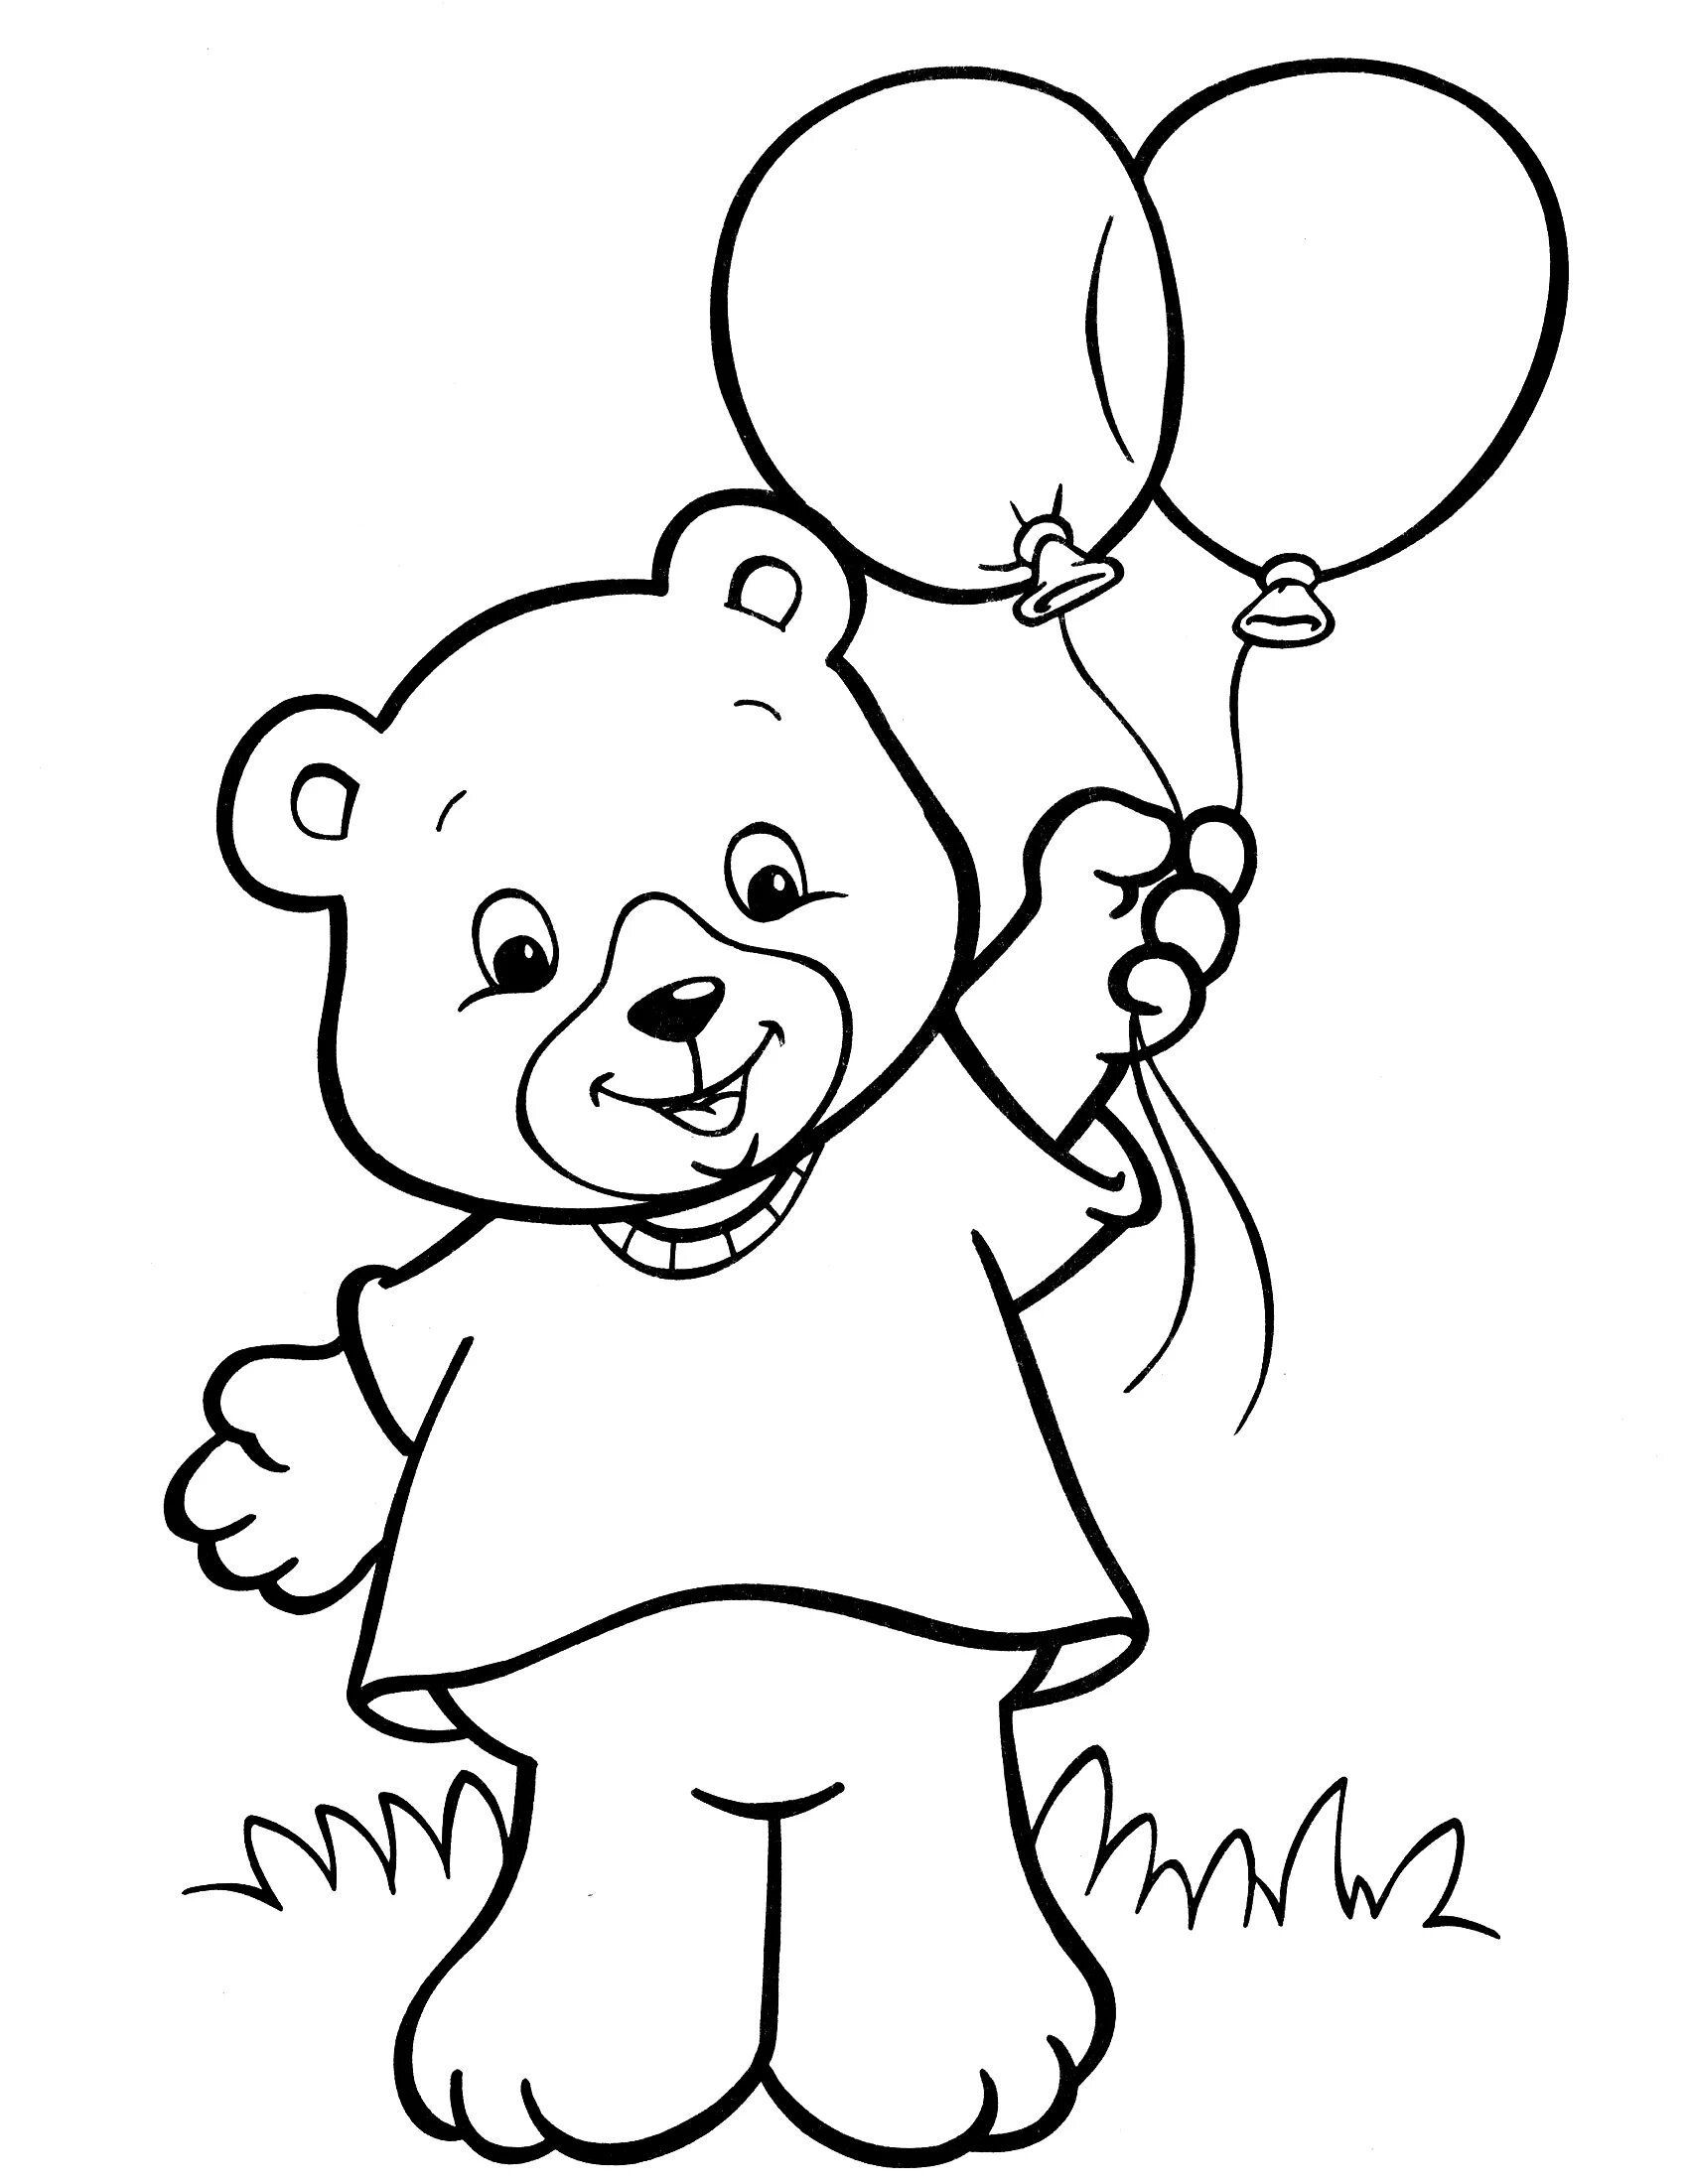 Witty teddy bear coloring book for 5-6 year olds